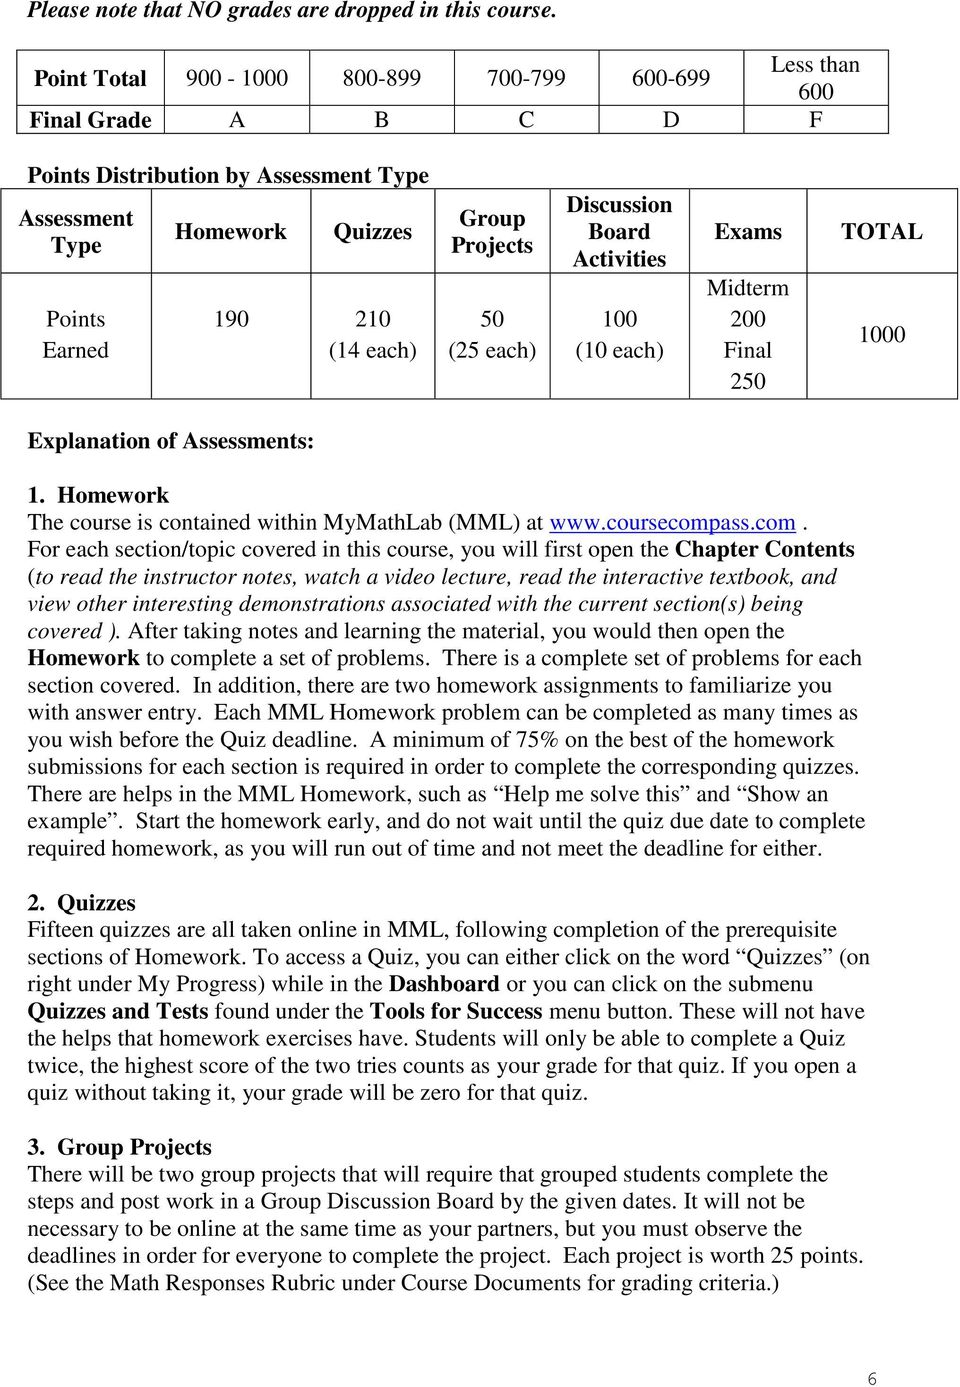 50 (25 each) Discussion Board Activities 100 (10 each) Exams Midterm 200 Final 250 TOTAL 1000 Explanation of Assessments: 1. Homework The course is contained within MyMathLab (MML) at www.